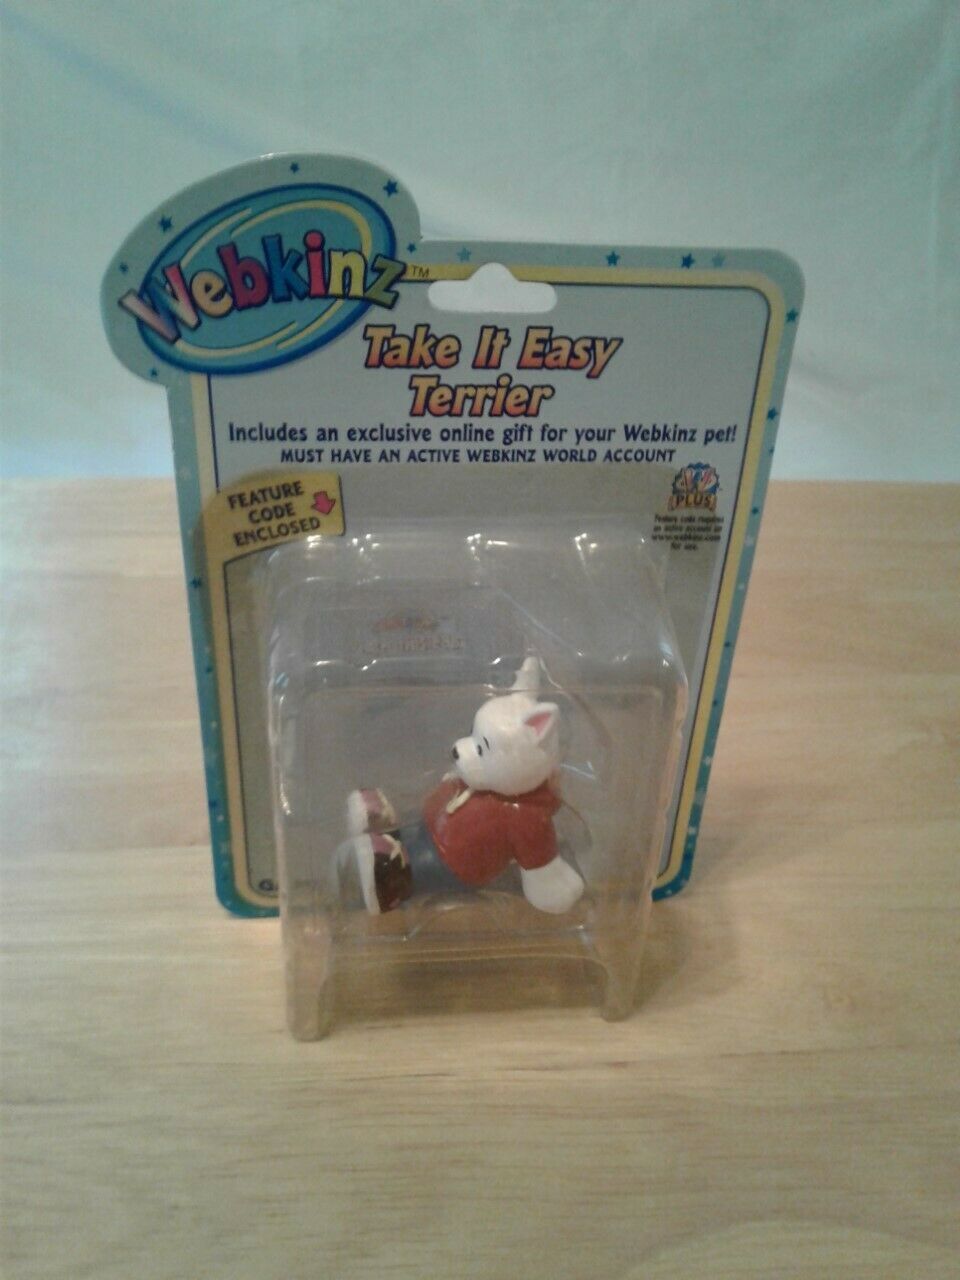 webkinz figurines Take it Easy Terrier new, combine shipping discount